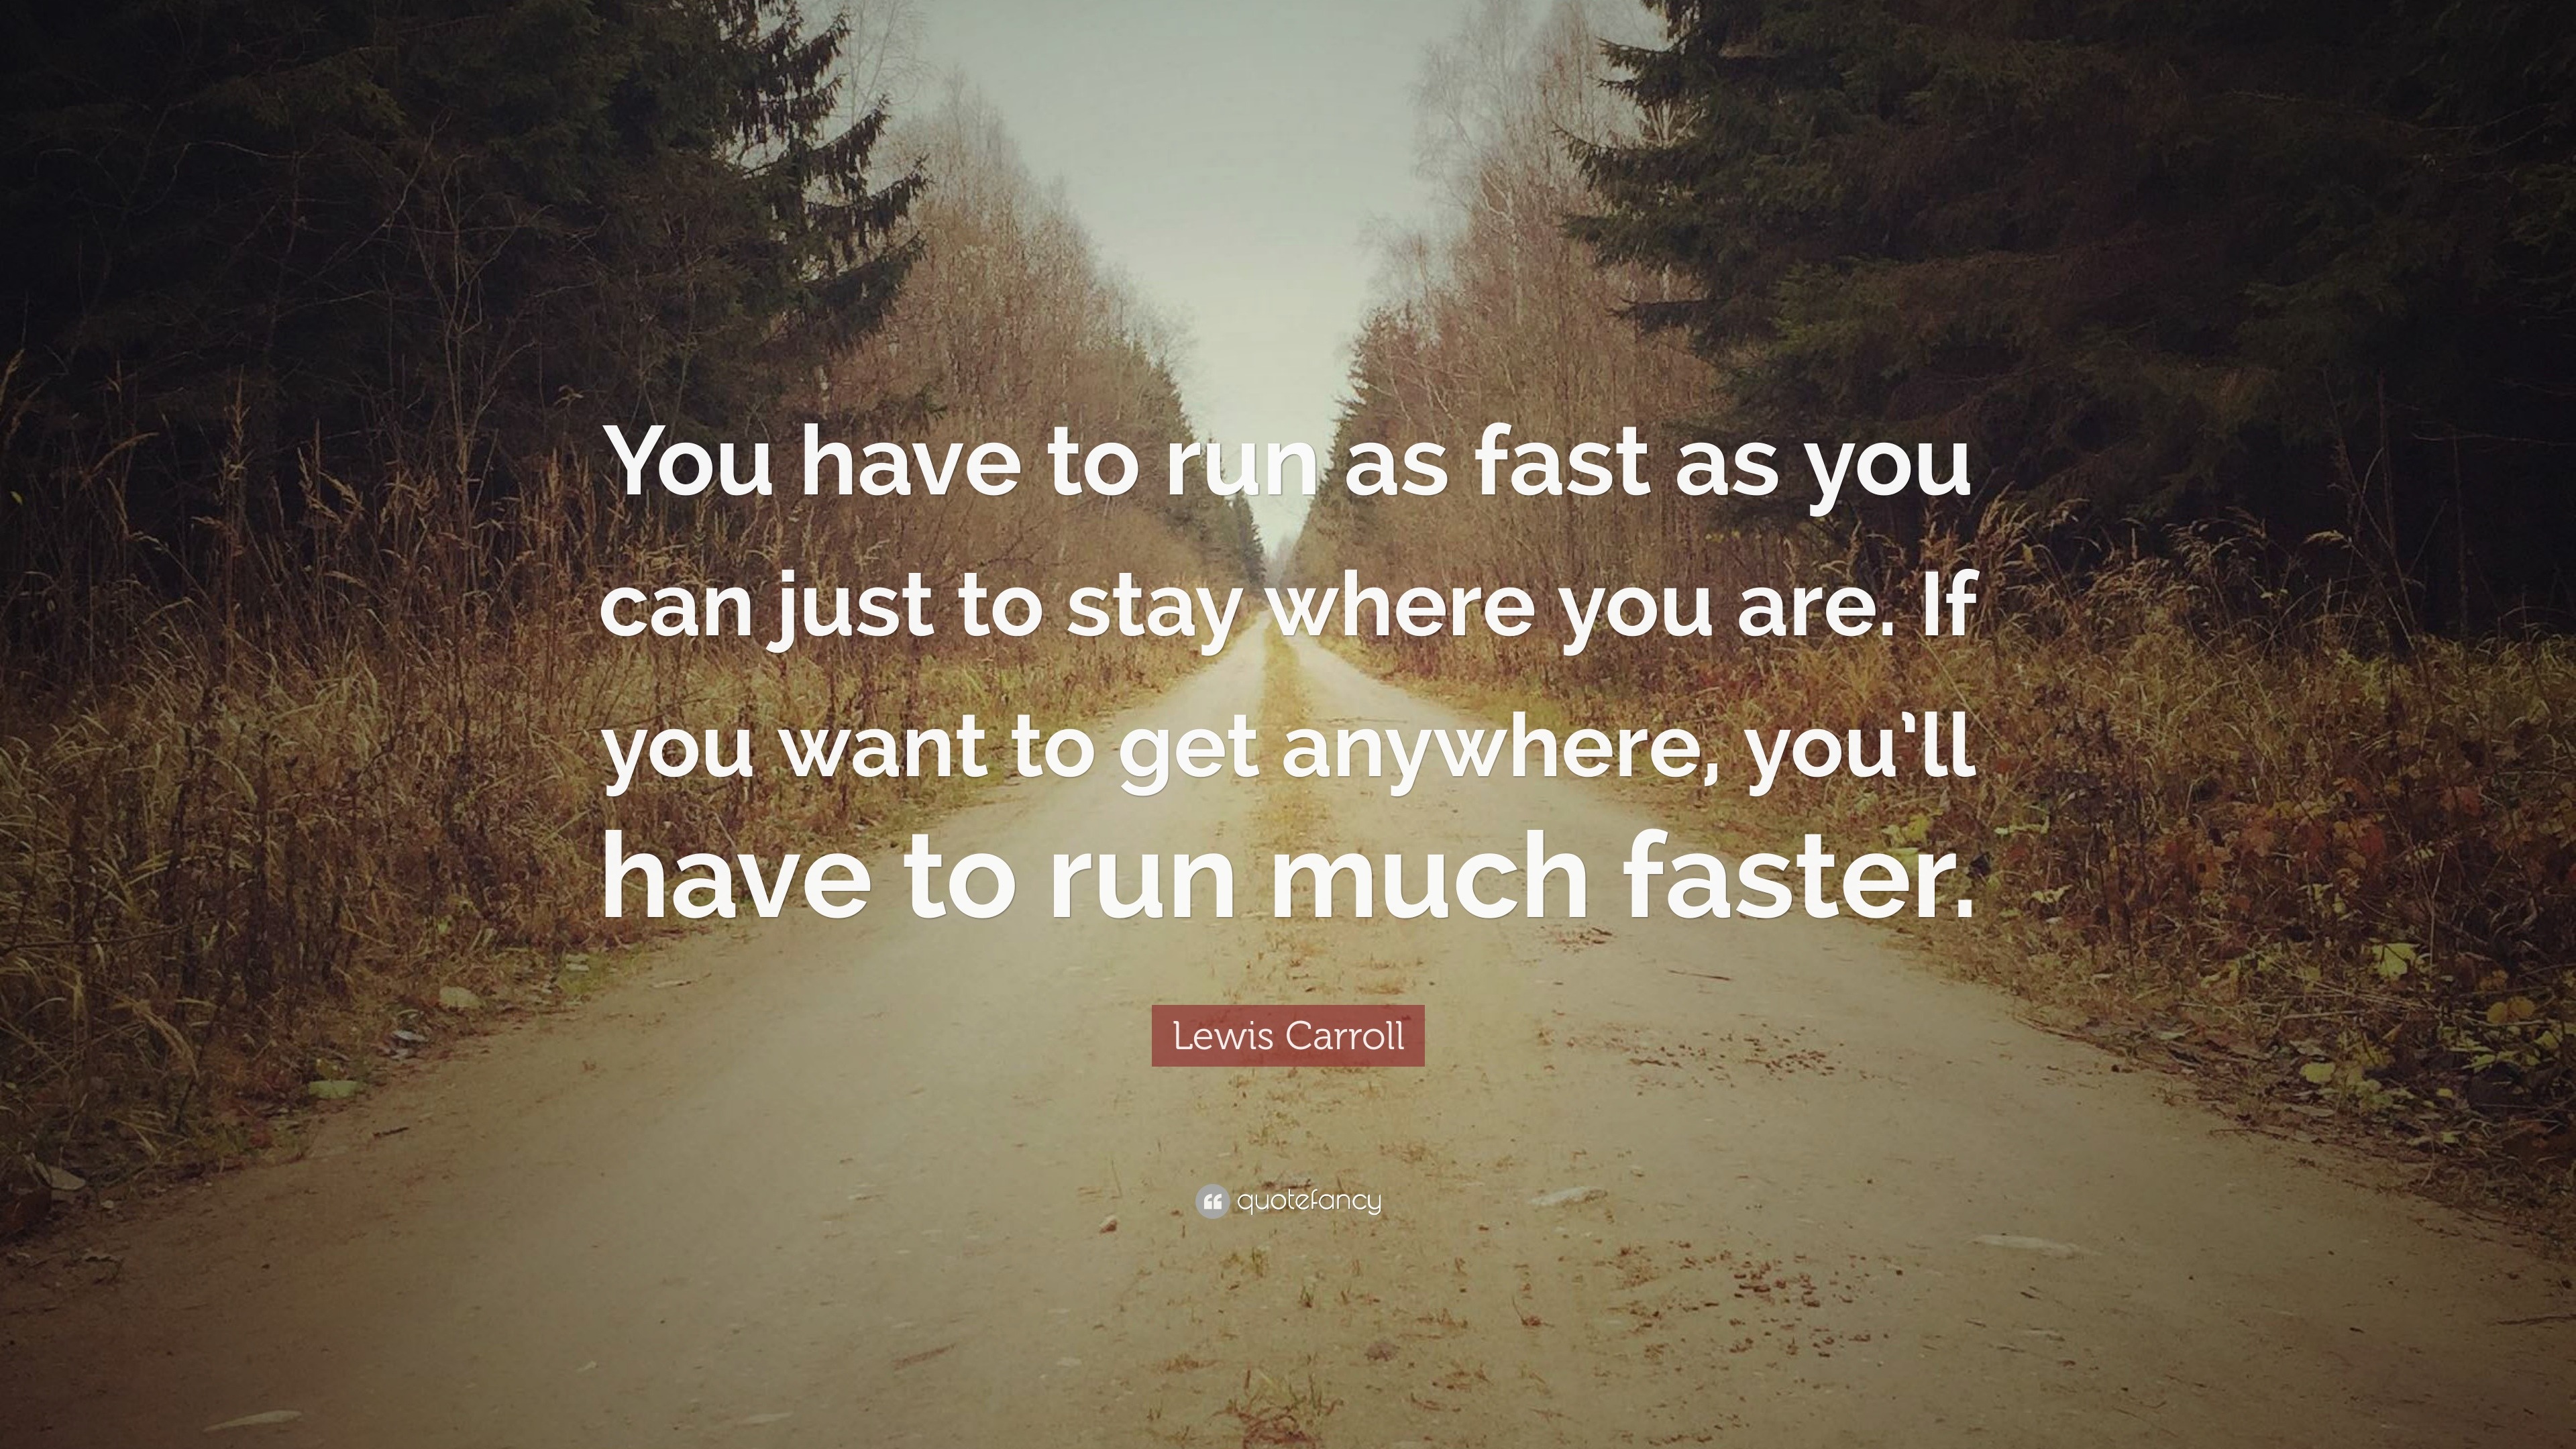 Lewis Carroll Quote: “You have to run as fast as you can just to